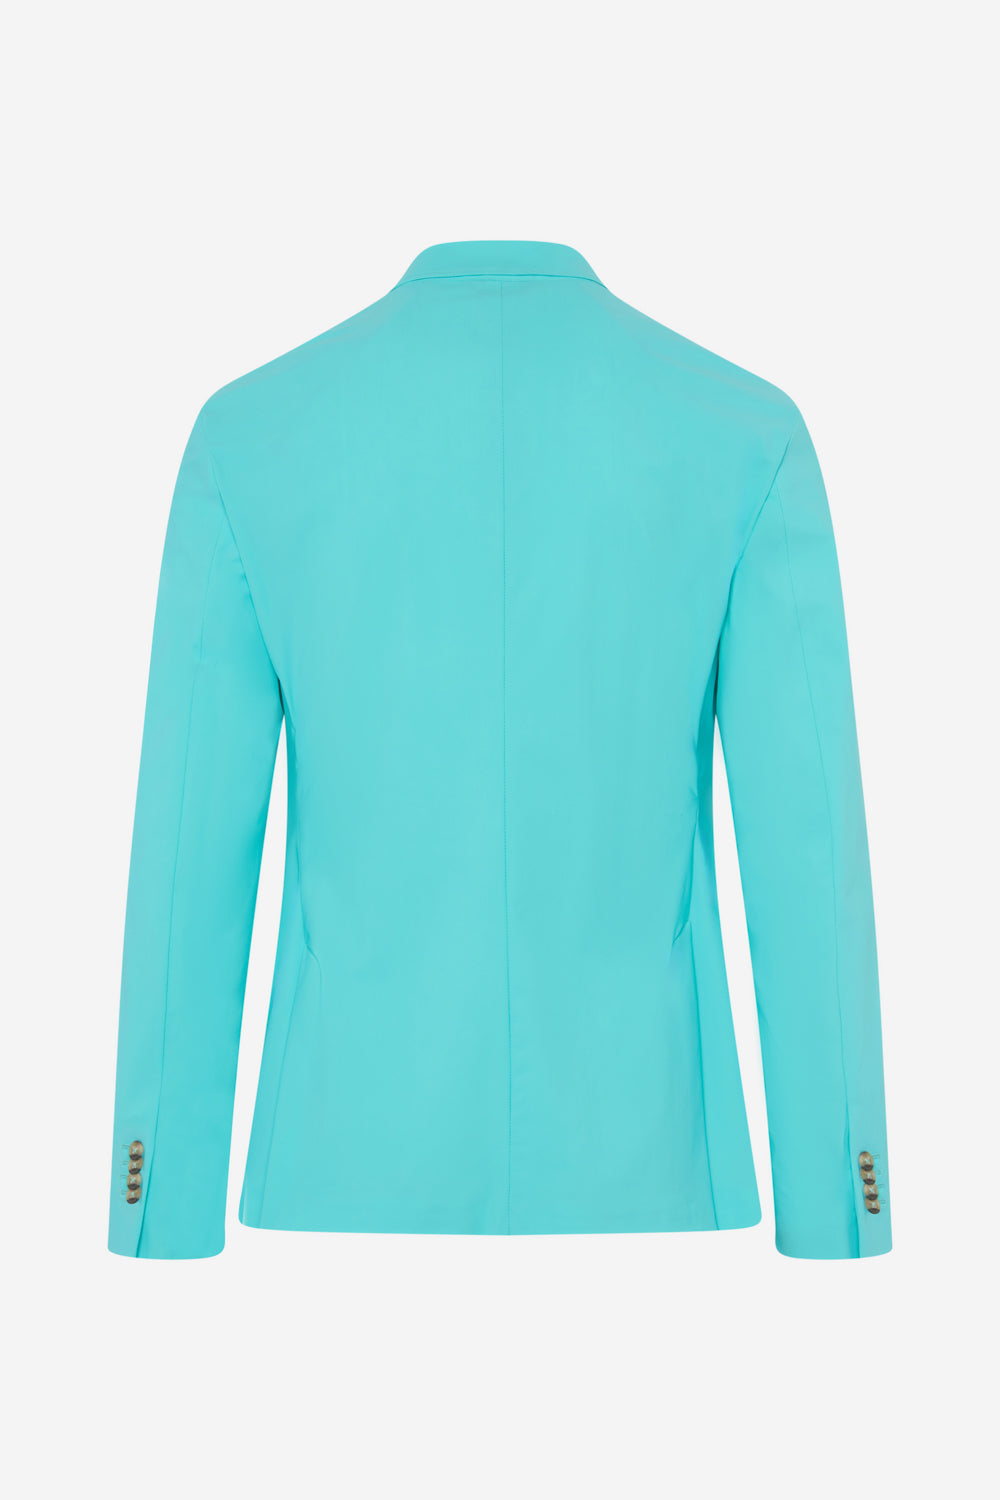 TURQUOISE JACKET SPECIAL LAPS